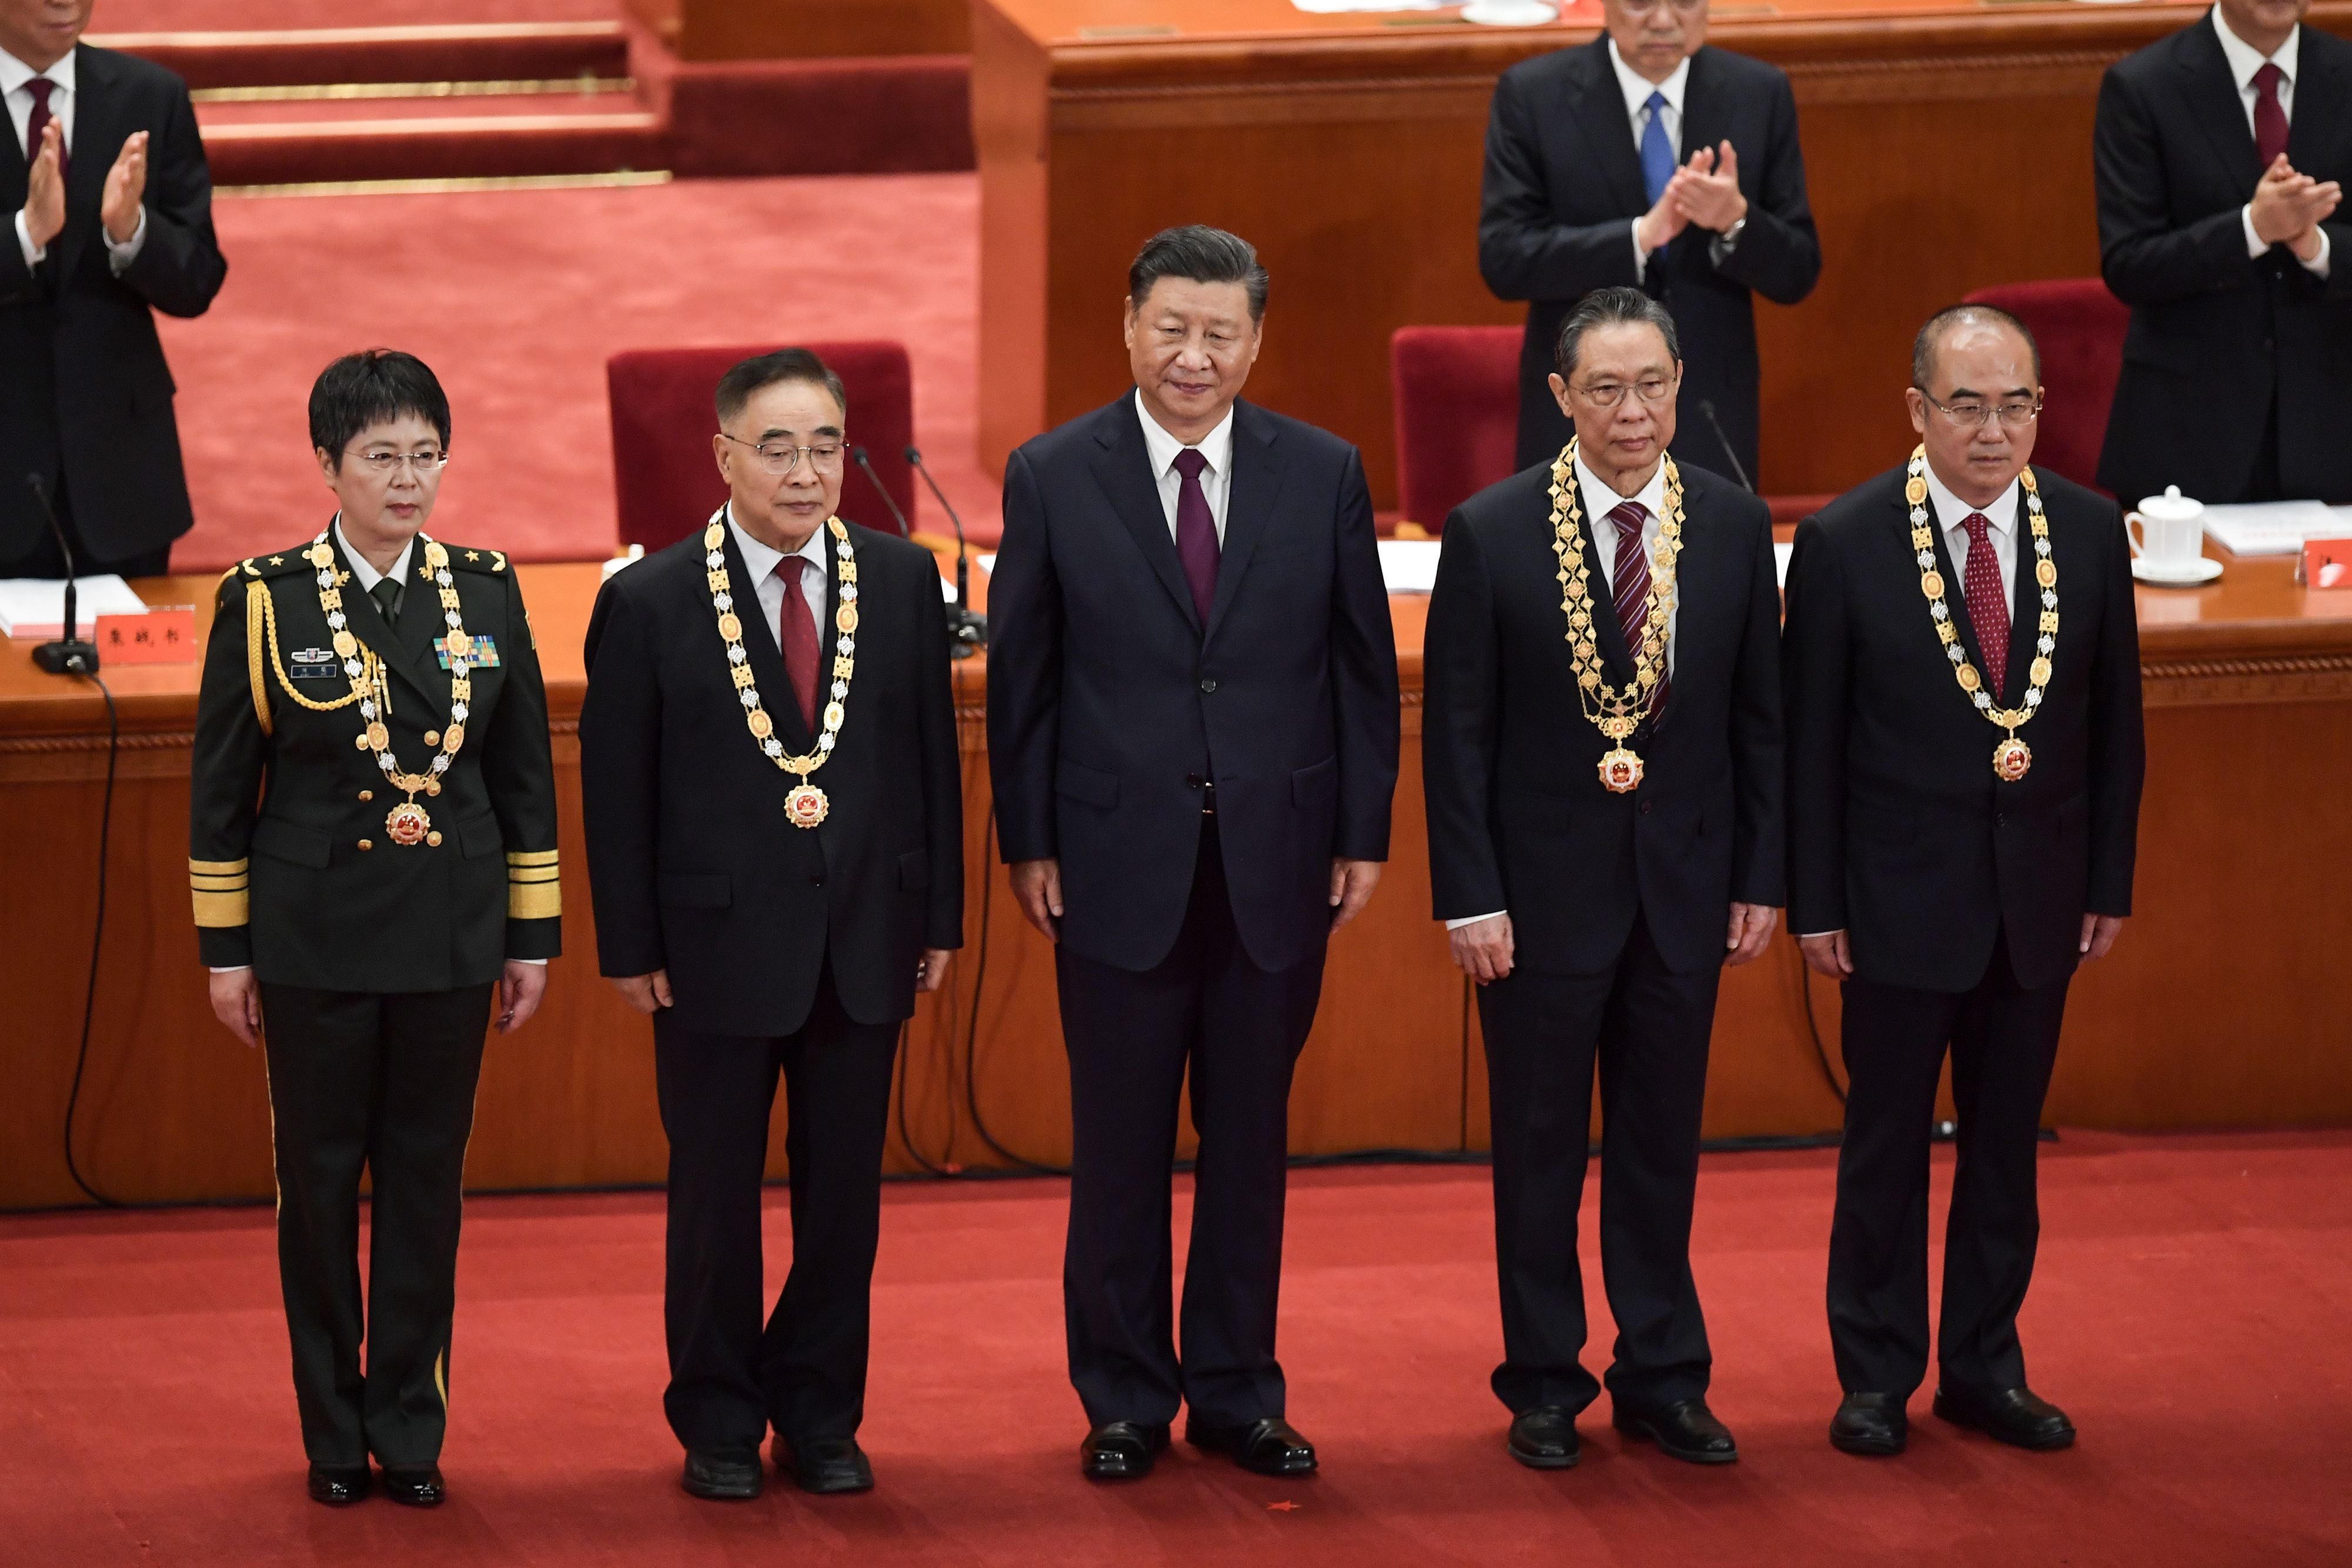 President Xi Jinping with leading health officials at a ceremony to honour people who fought against the pandemic